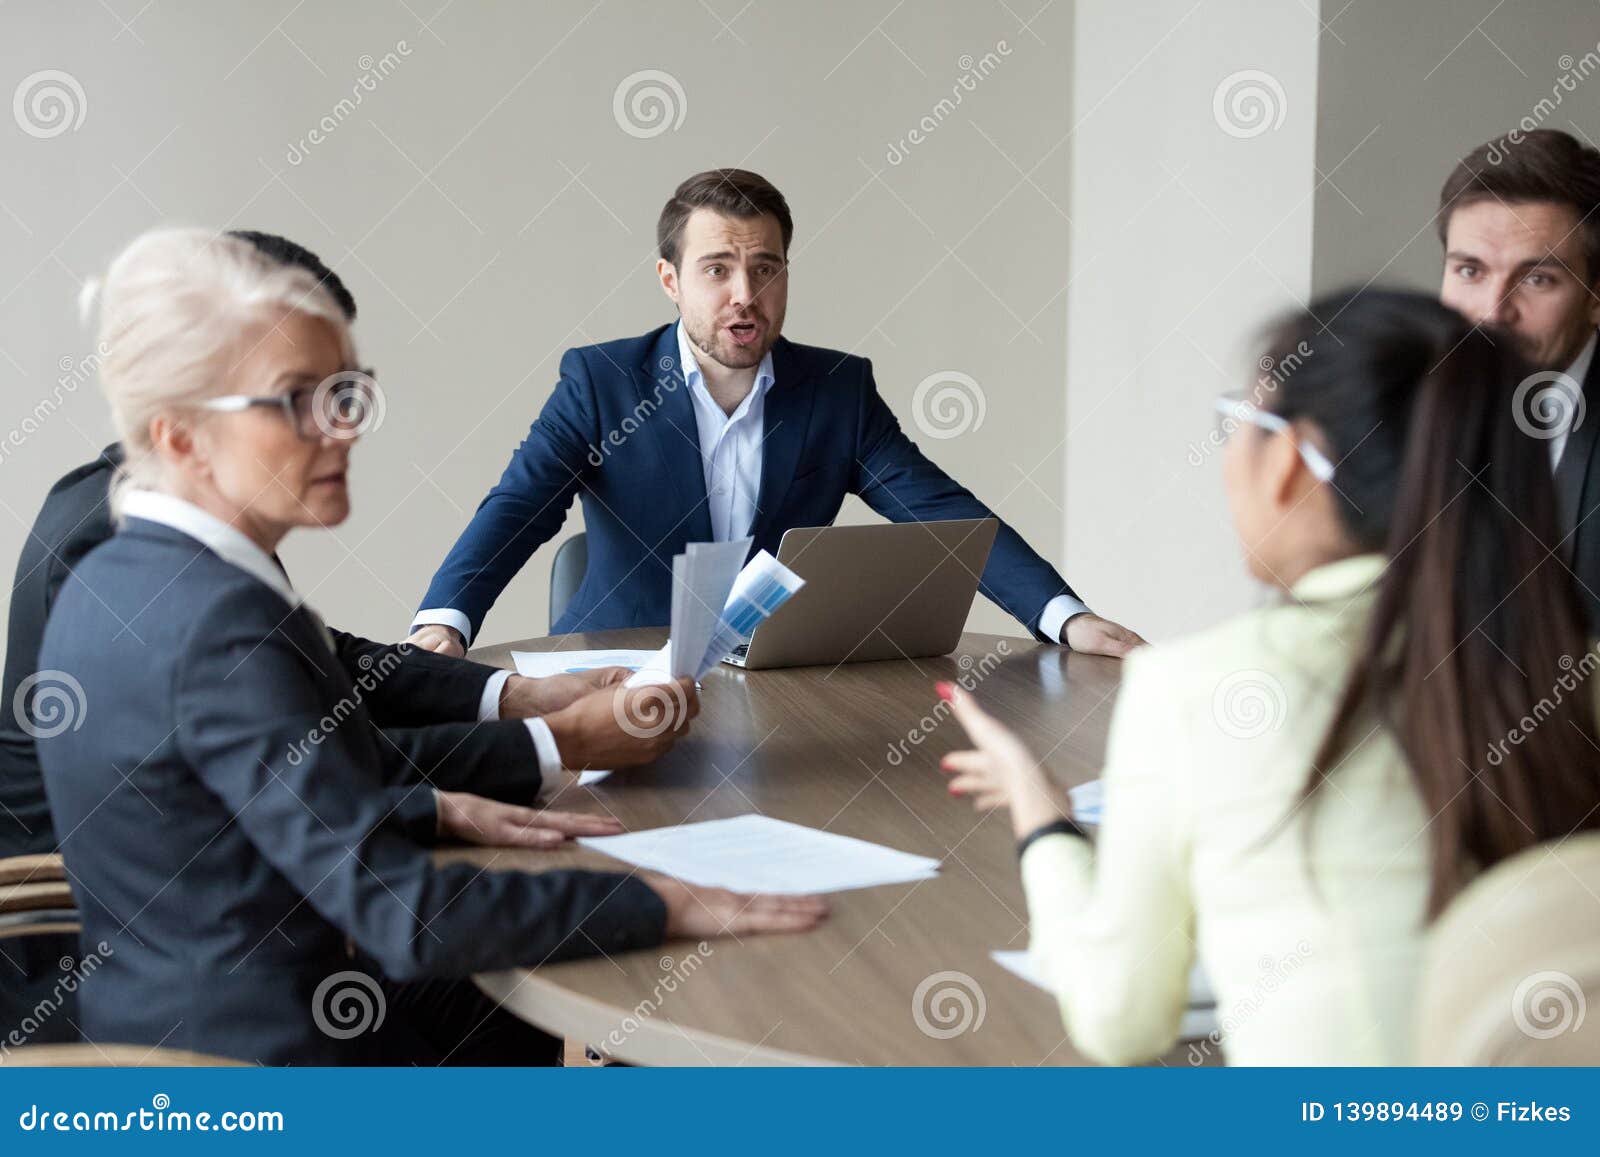 angry executive shouting having disagreement with employee at group meeting